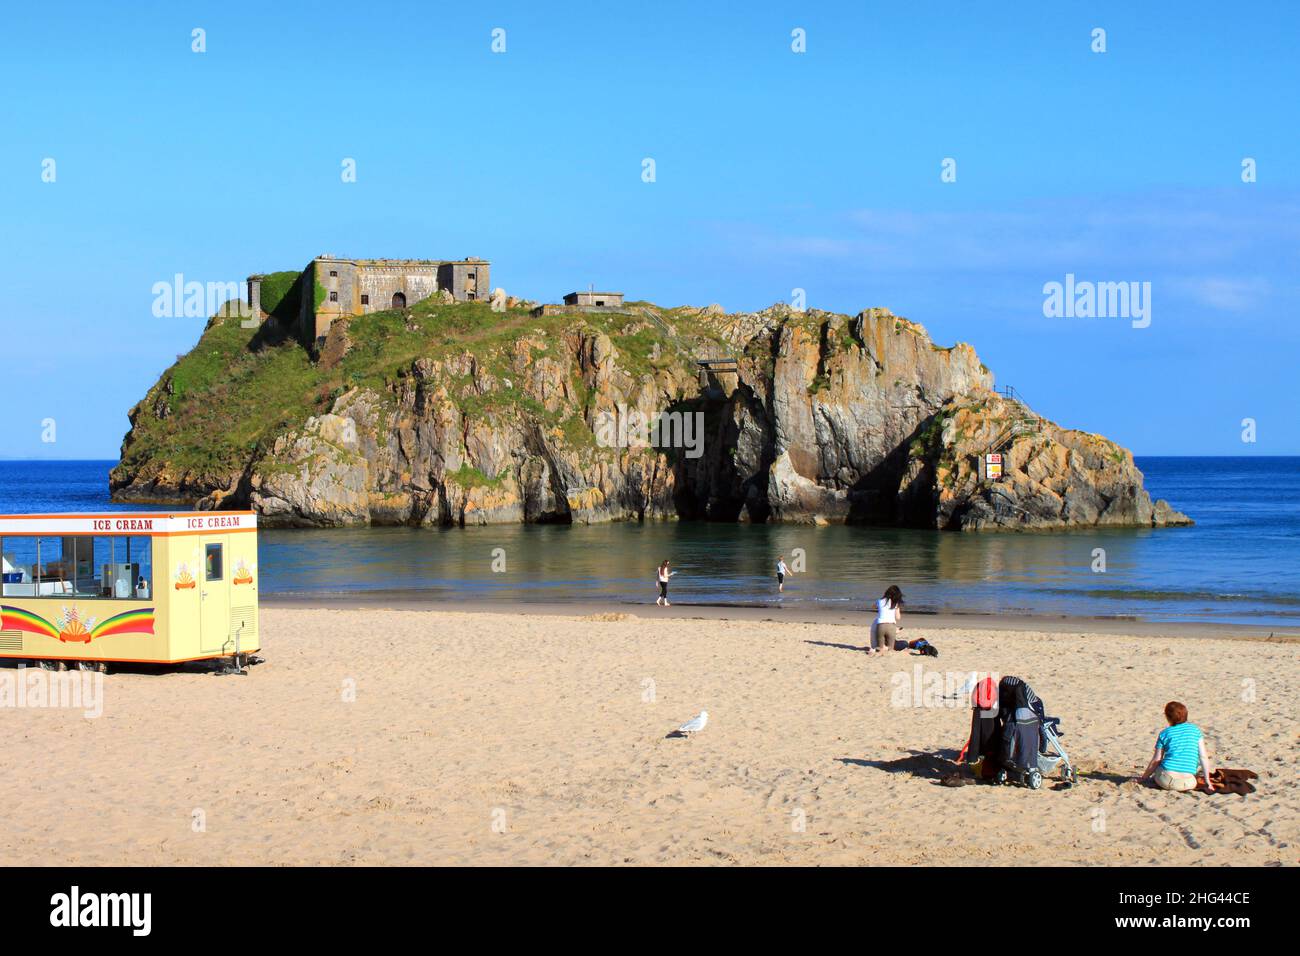 Beach at Tenby, with Saint Catherine's island and fortress. Stock Photo